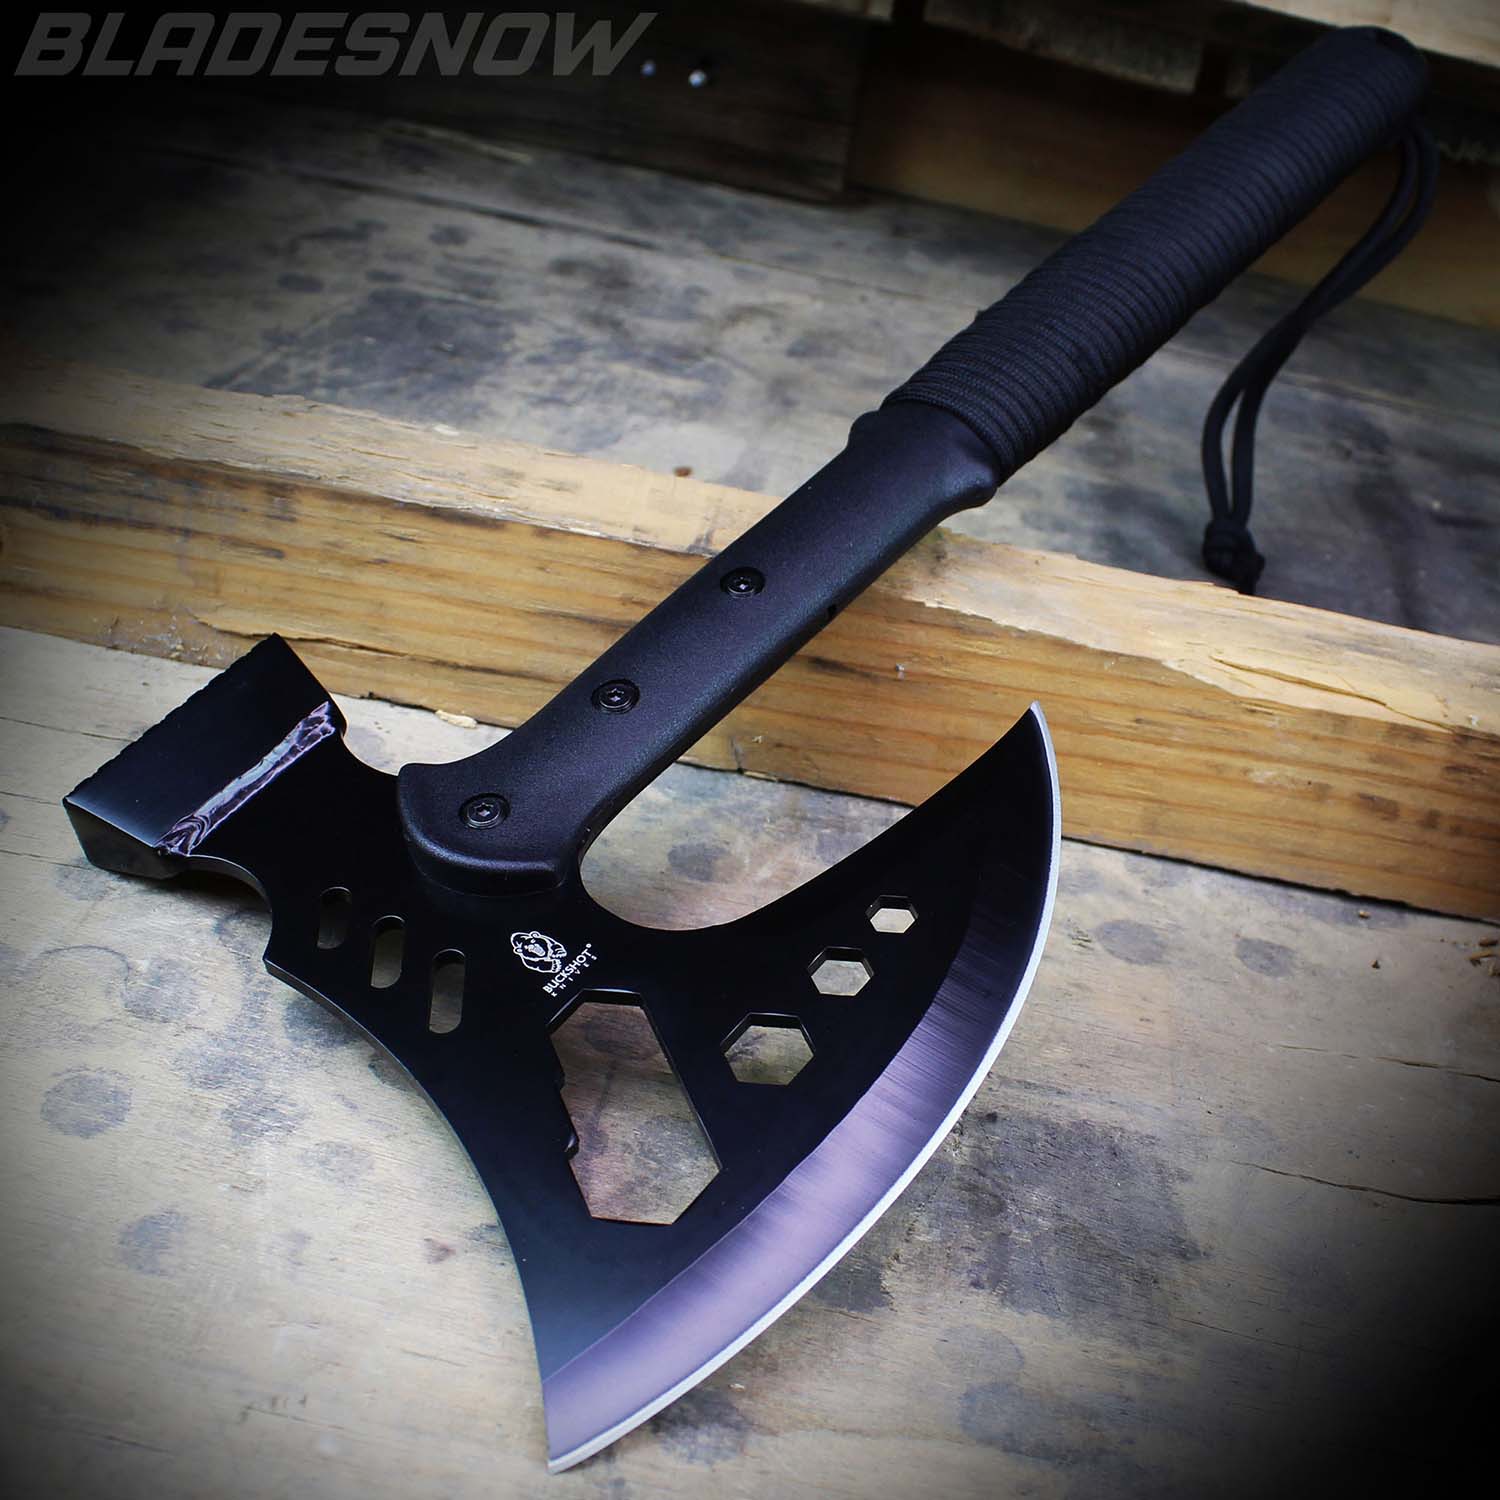 View All Products - Blades Now Knives & Swords | 2 | Multifunktionstücher